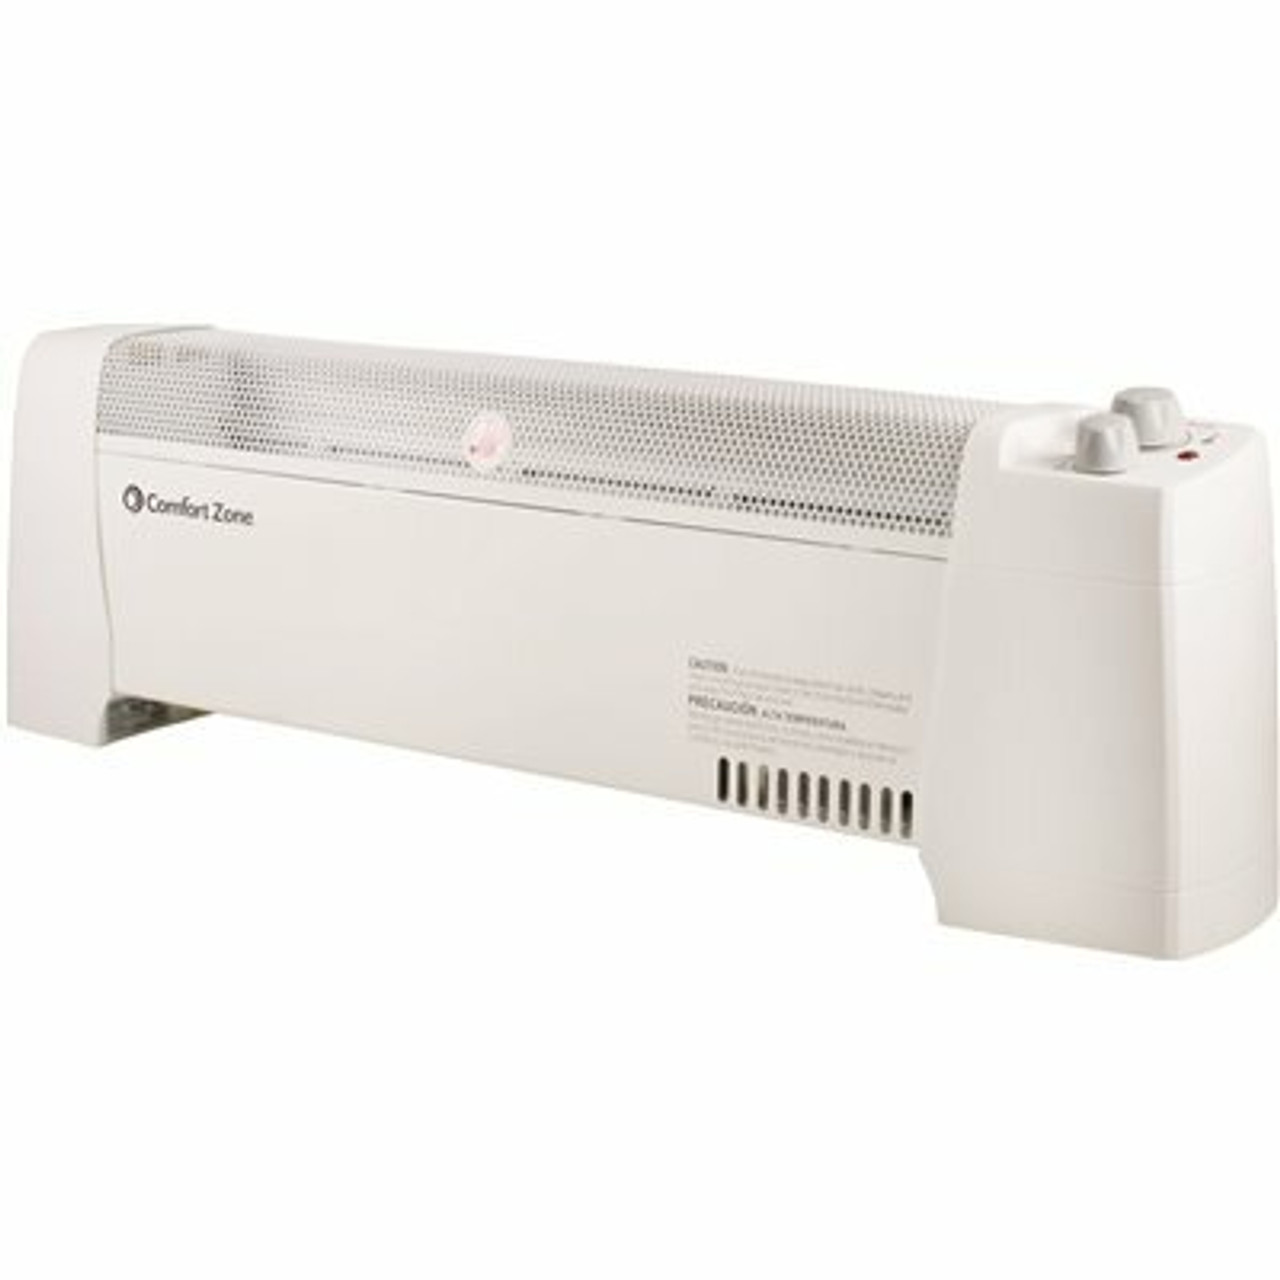 Comfort Zone 29 In. 1,500-Watt White Convection Baseboard Heater With Silent Operation